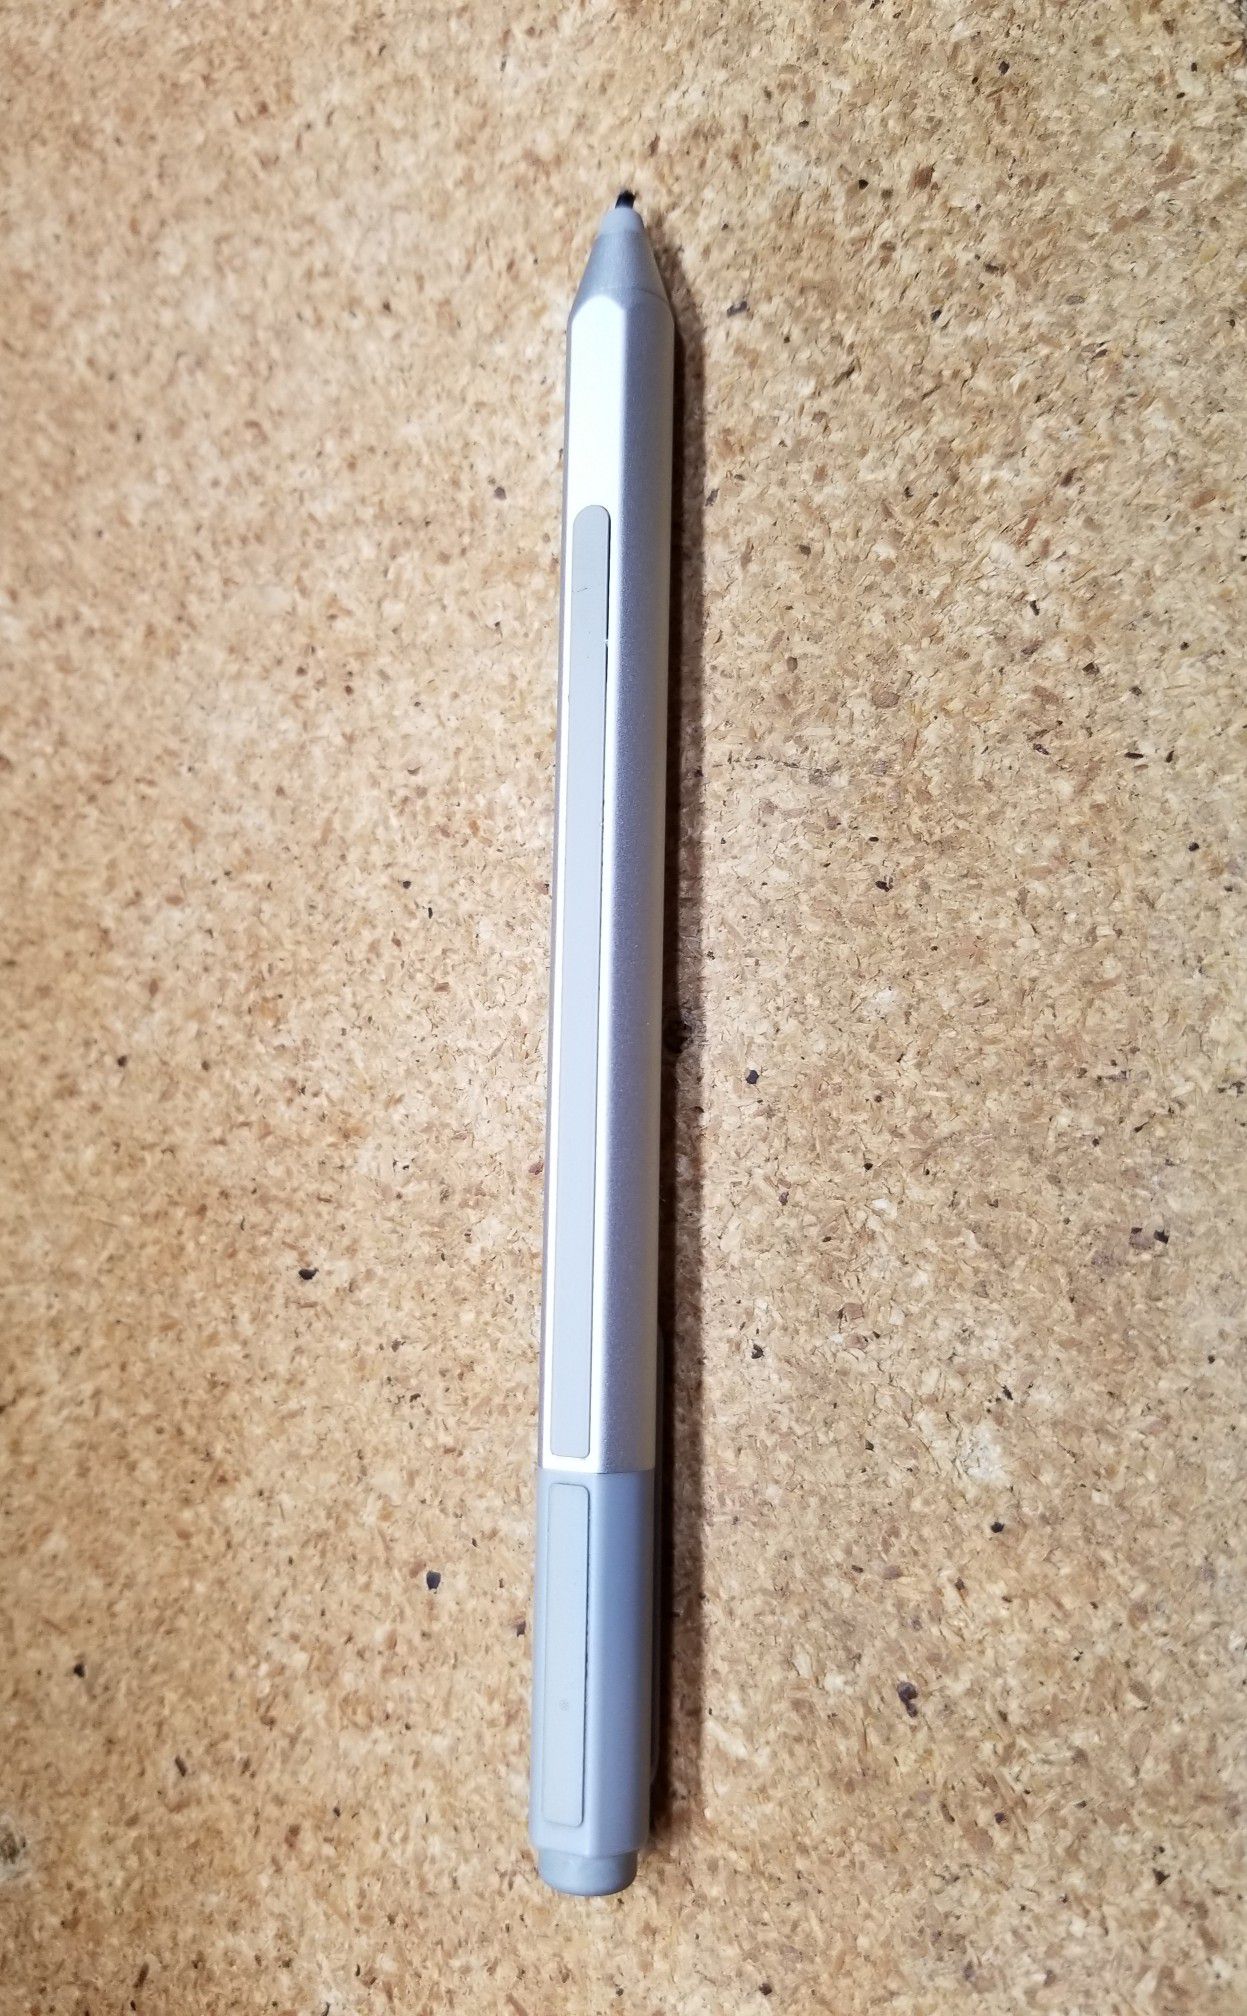 Stylus Pen for Microsoft Surface Pro 2, 3, 4, 5, Surface Book